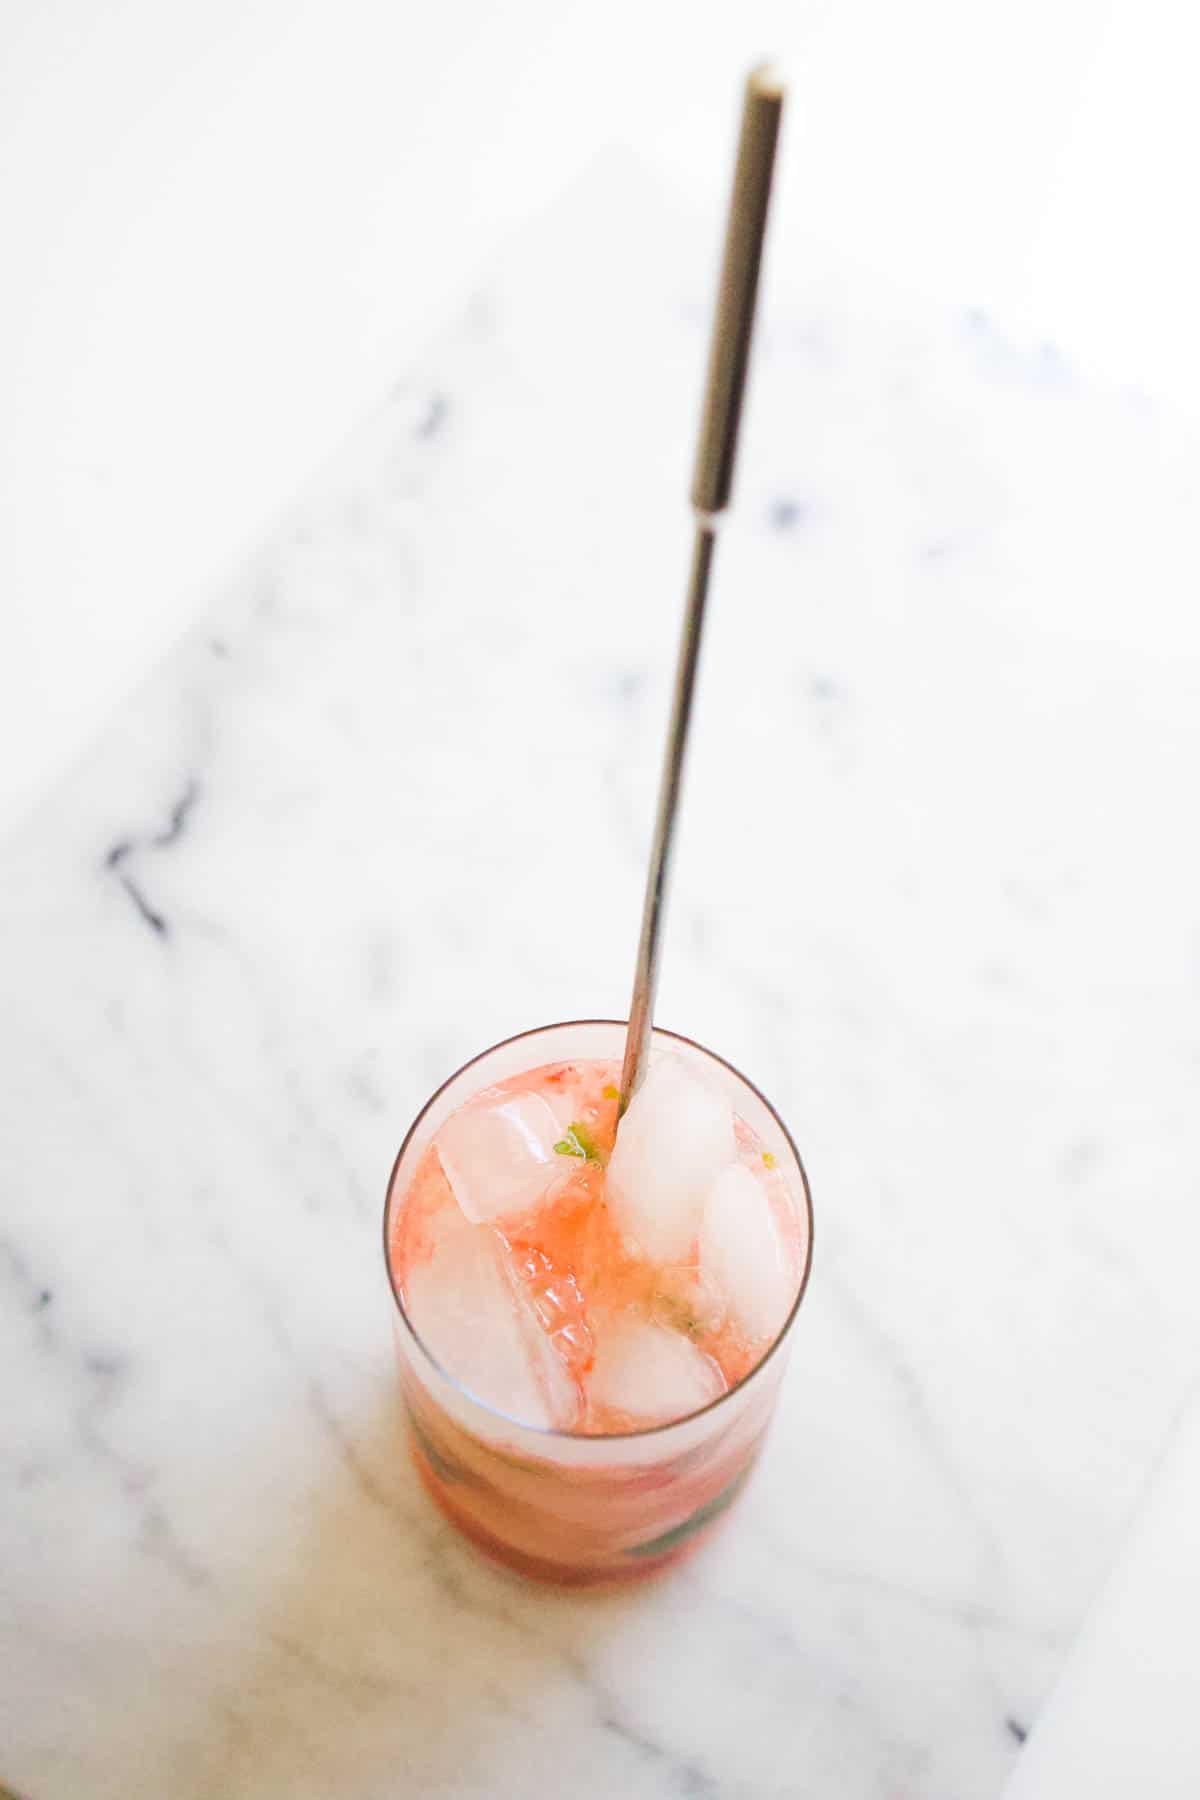 A top down view of a glass with ice and strawberry sparkling water with a long handled spoon.